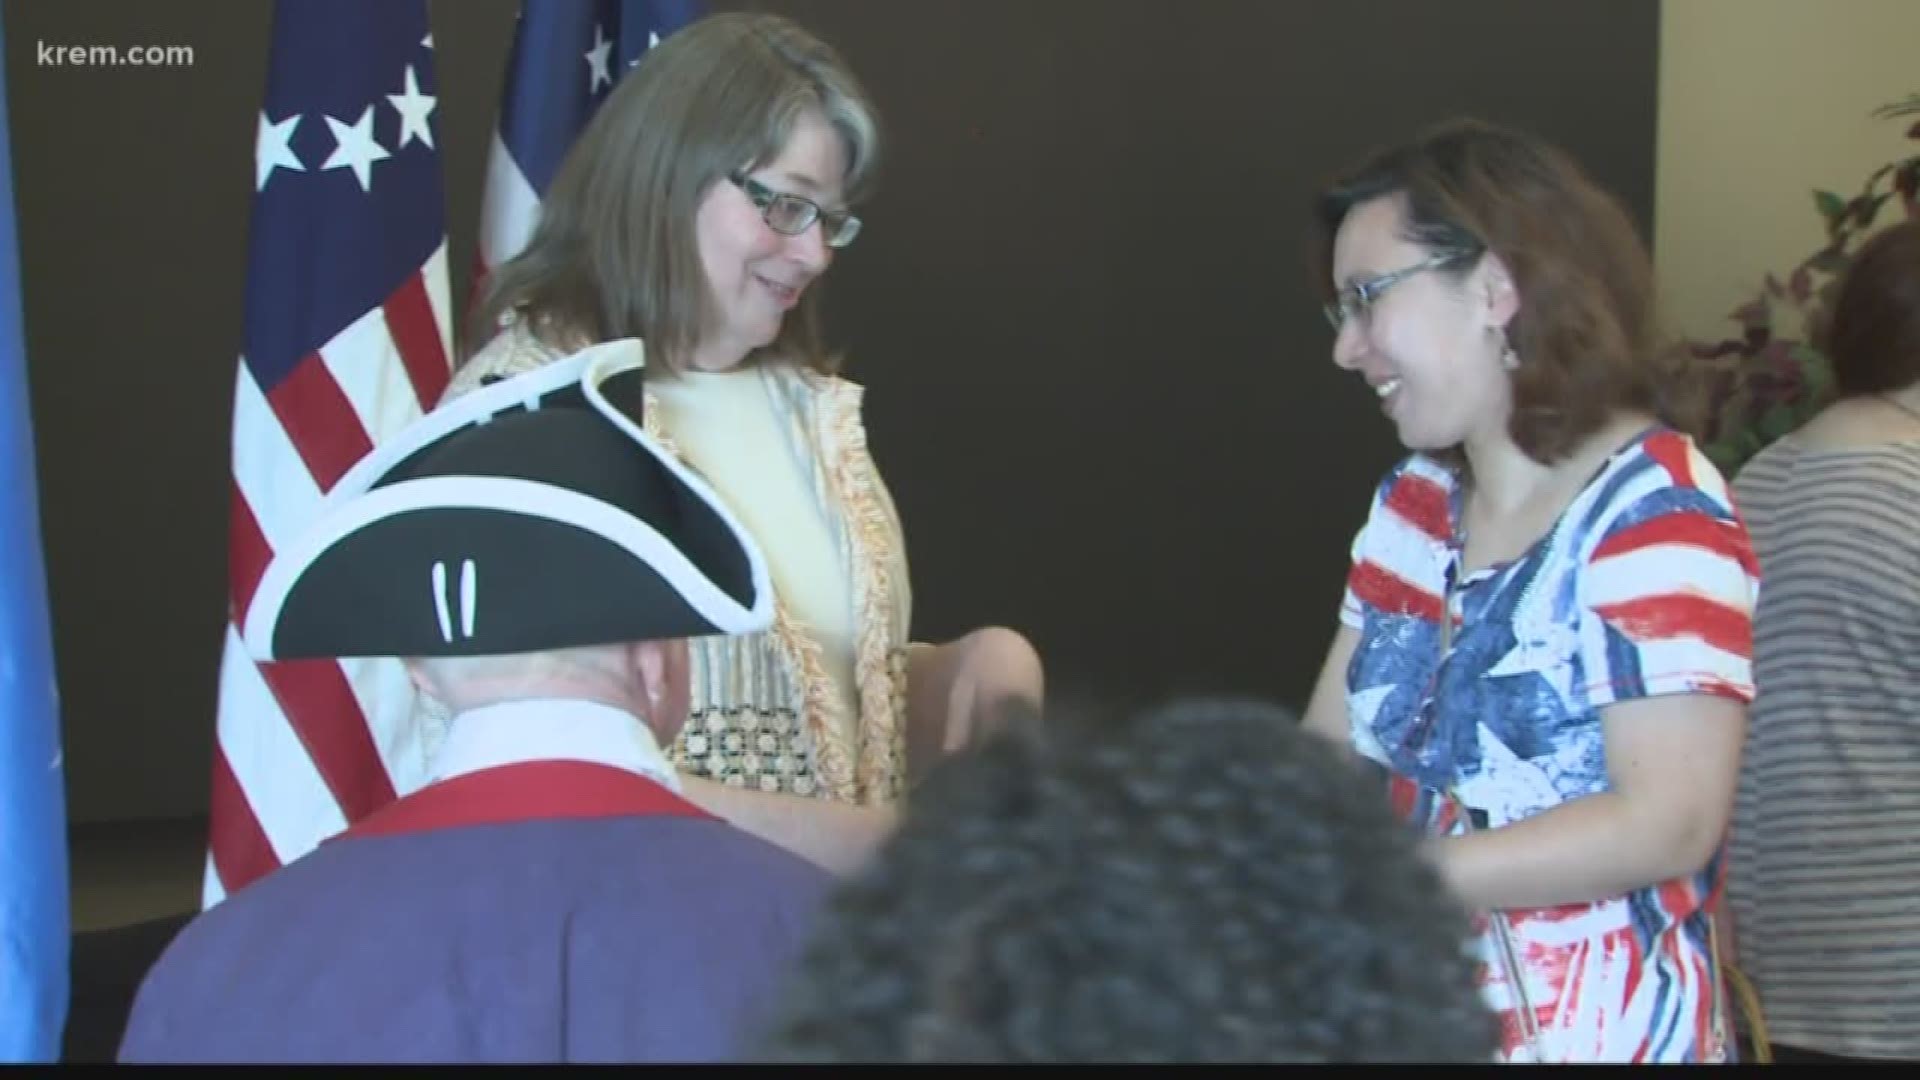 More than 100 people became Eastern Washington's newest citizens Wednesday.